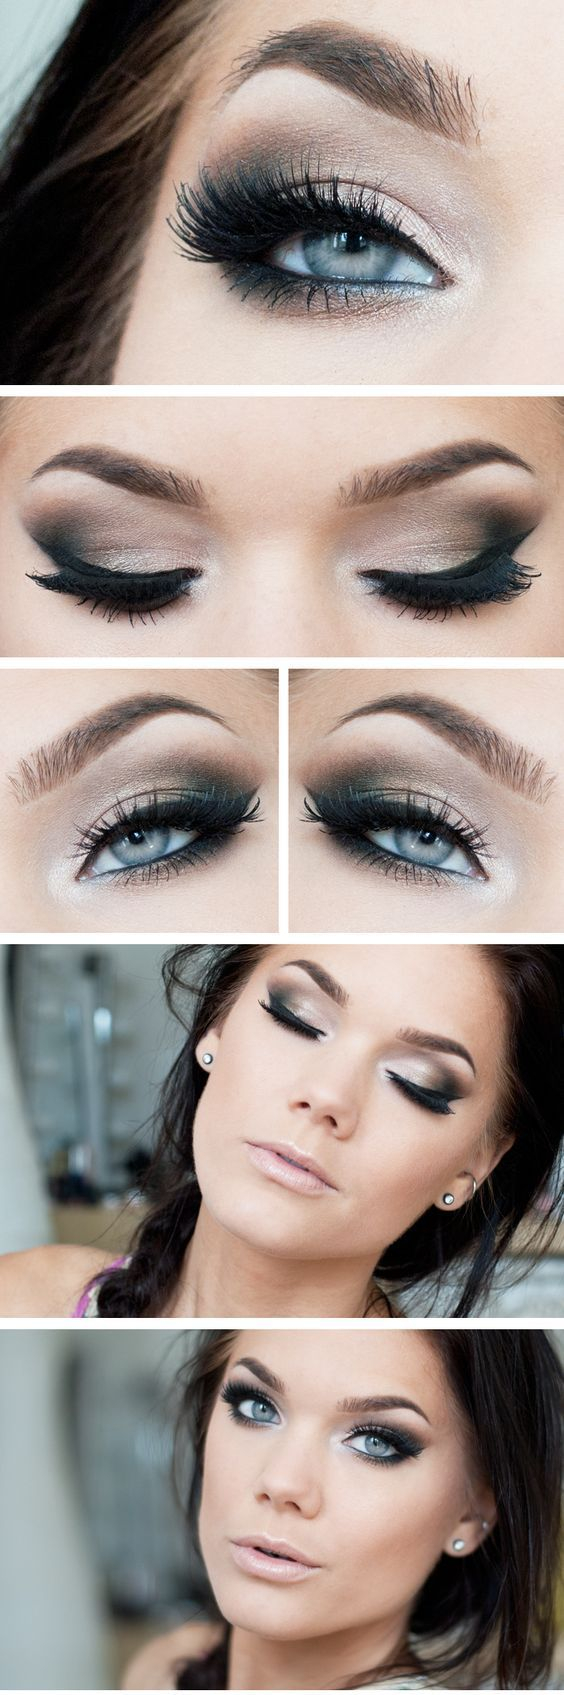 Makeup For Deep Set Eyes Best Ideas For Makeup Tutorials The Best Makeup Tips To Make Your